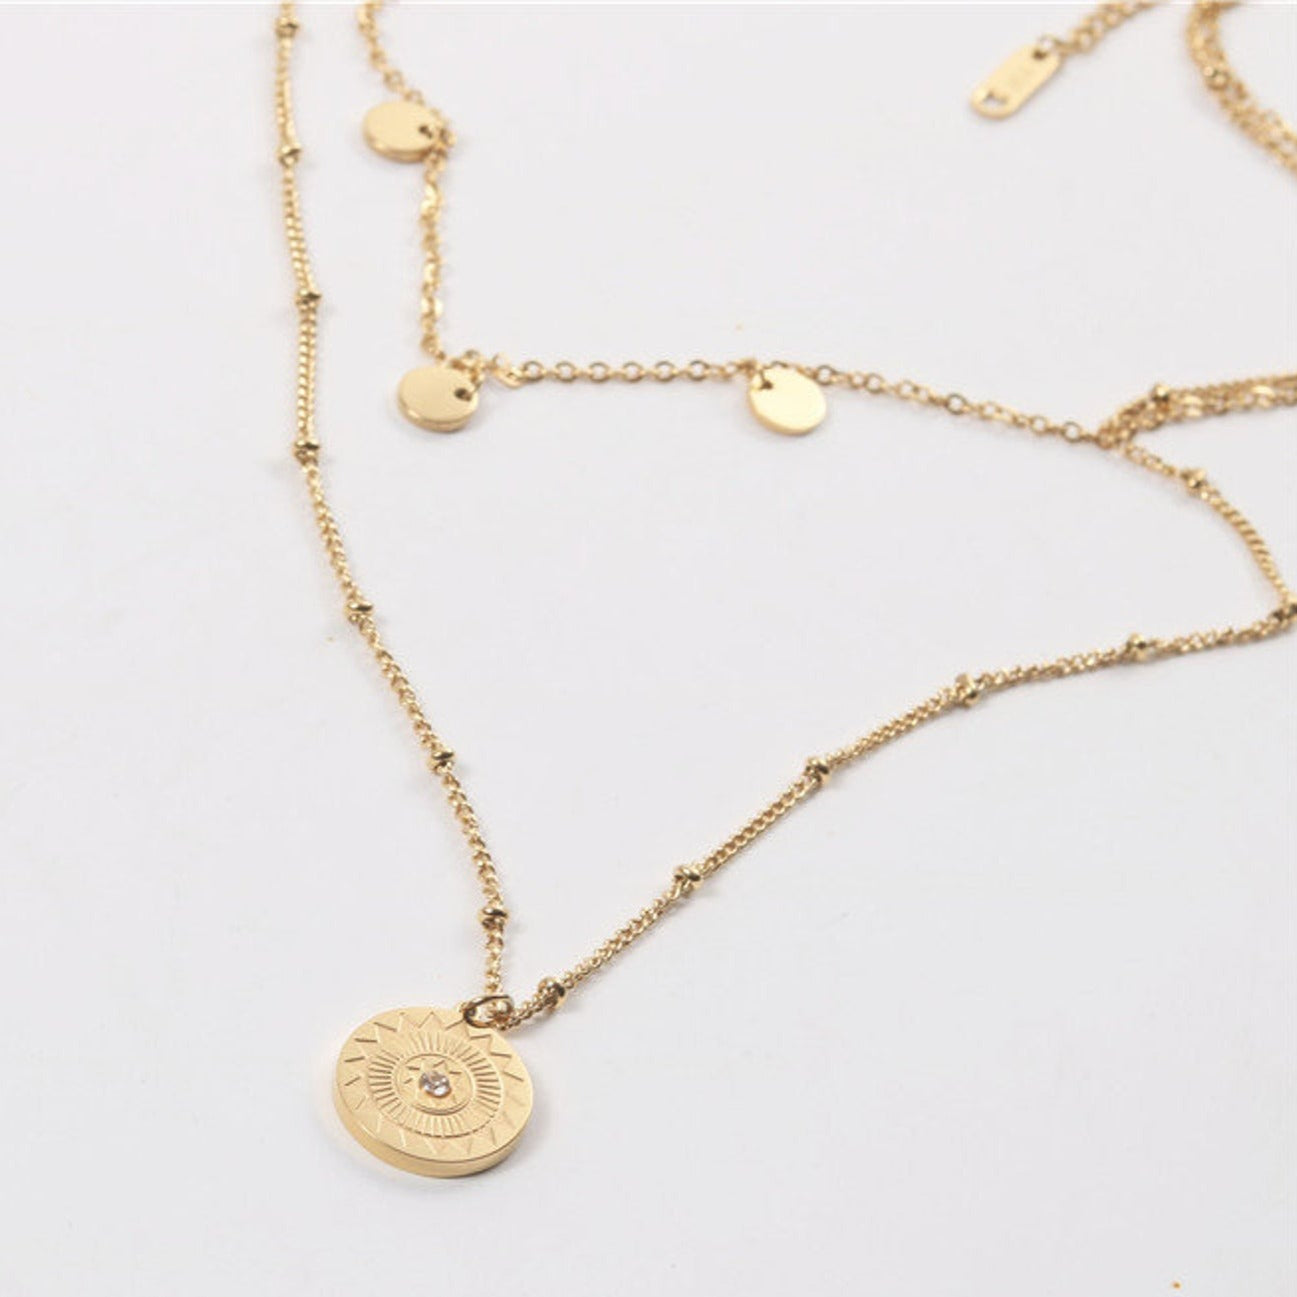 Check out Satellite Chain Necklace